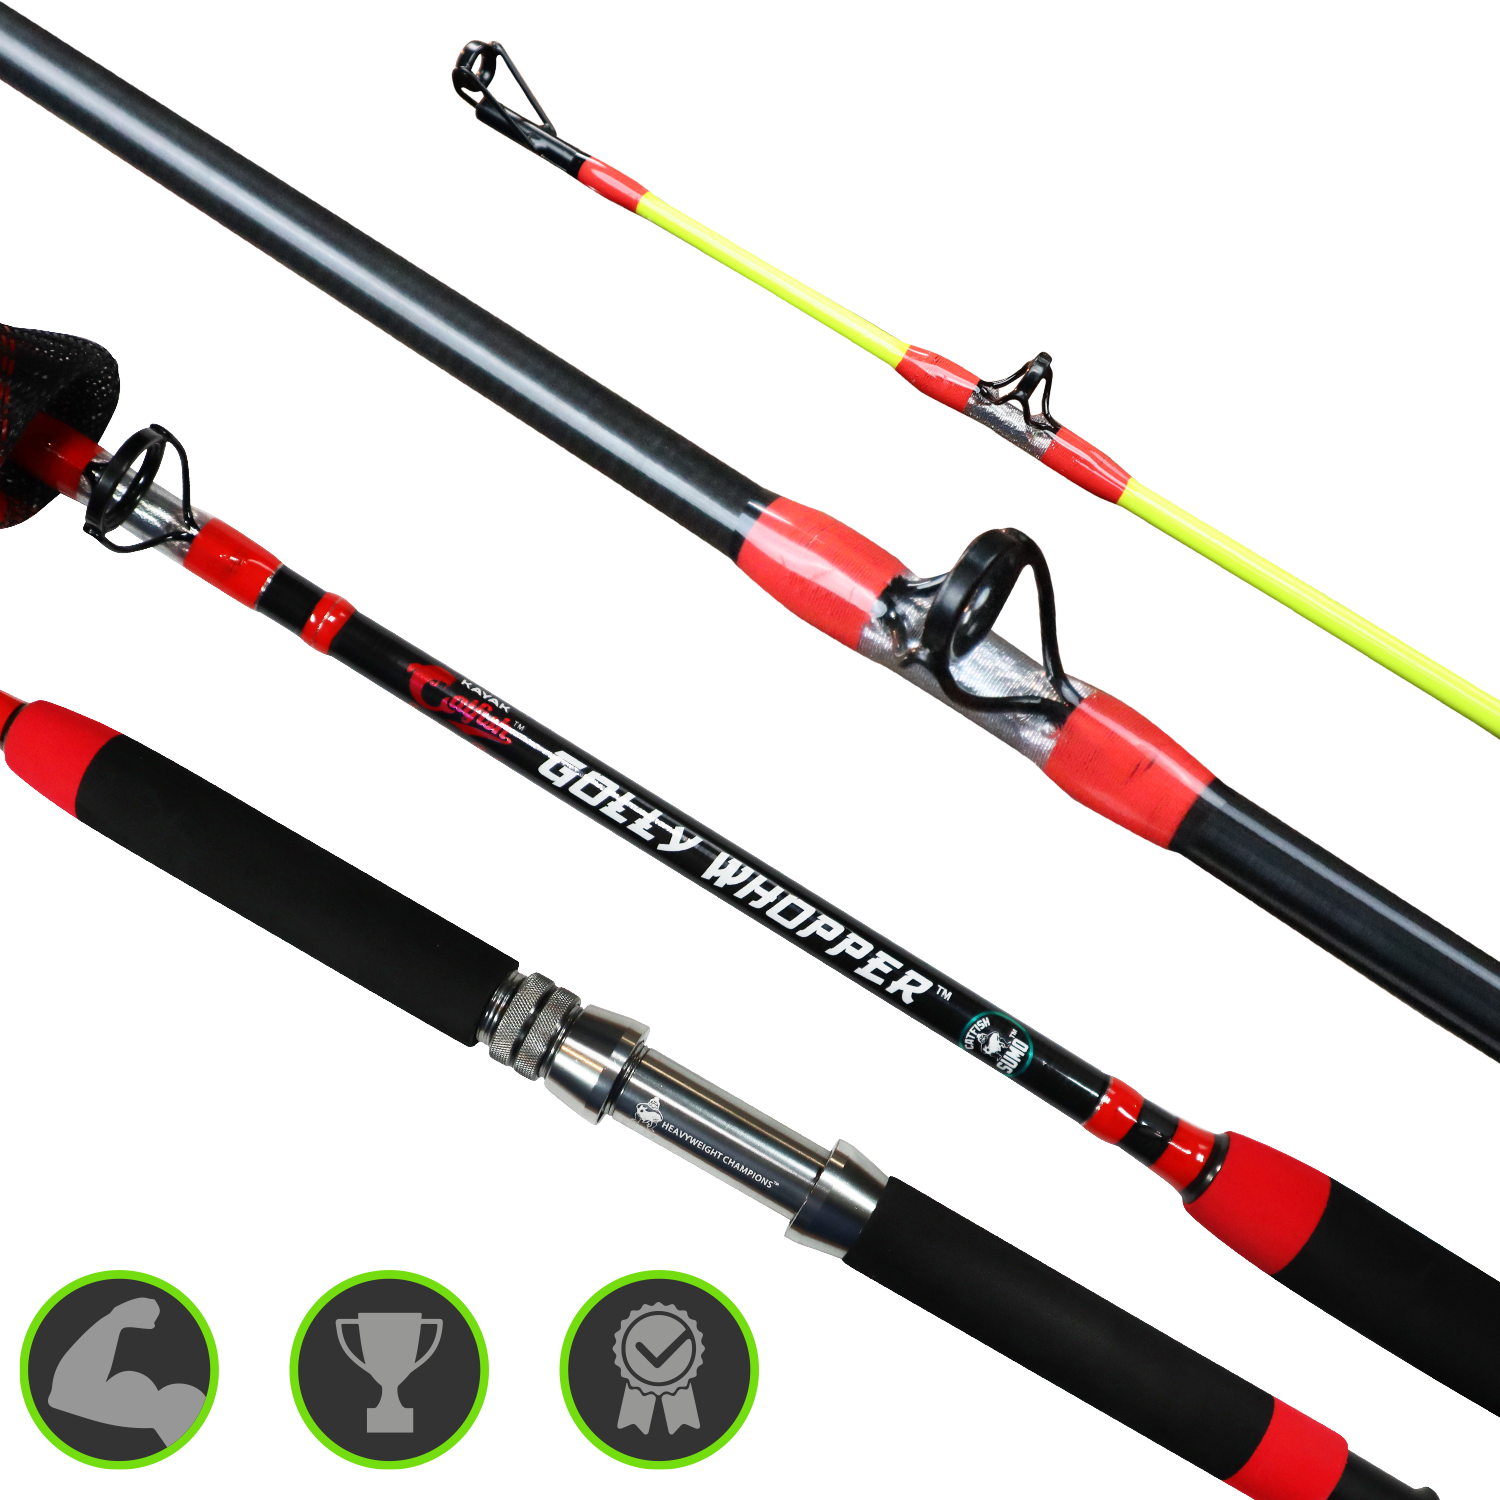 Golly Whopper: Kayak Catfish Signature Rod, Medium Heavy with 3 Handles for Kayak, Boat, and Bank